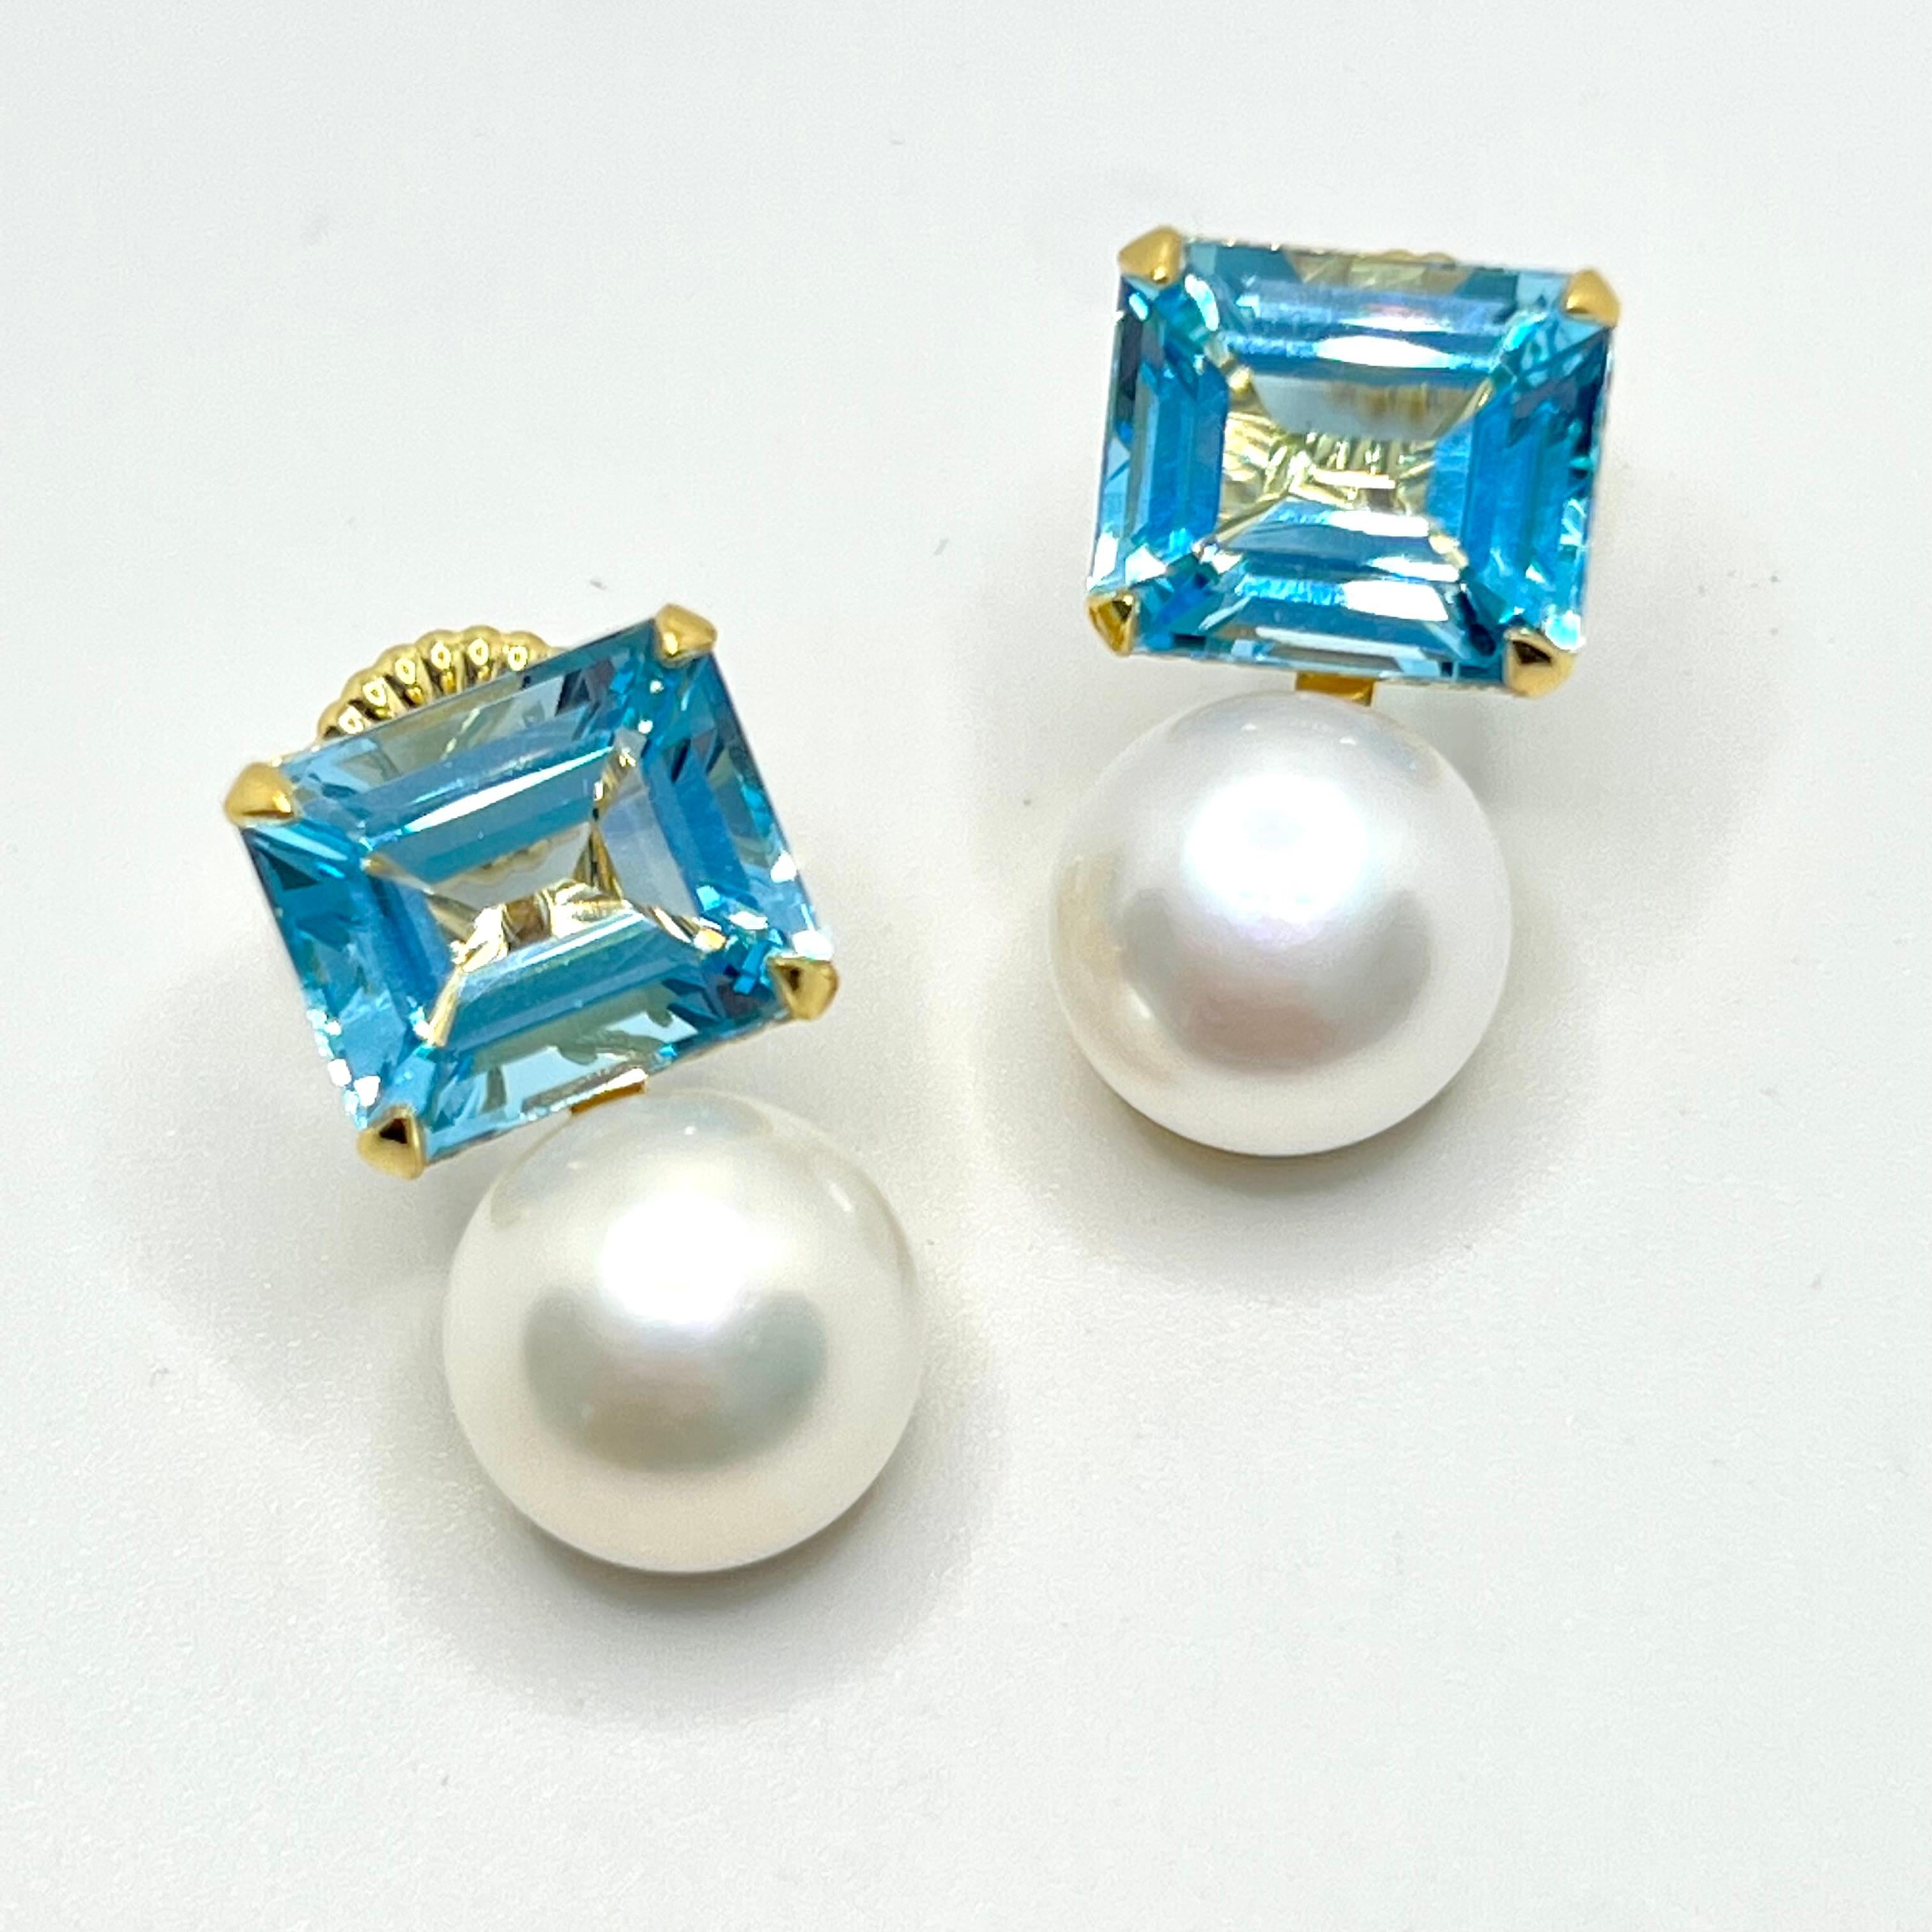 Contemporary Emerald-cut Blue Topaz and Freshwater Pearl Earrings